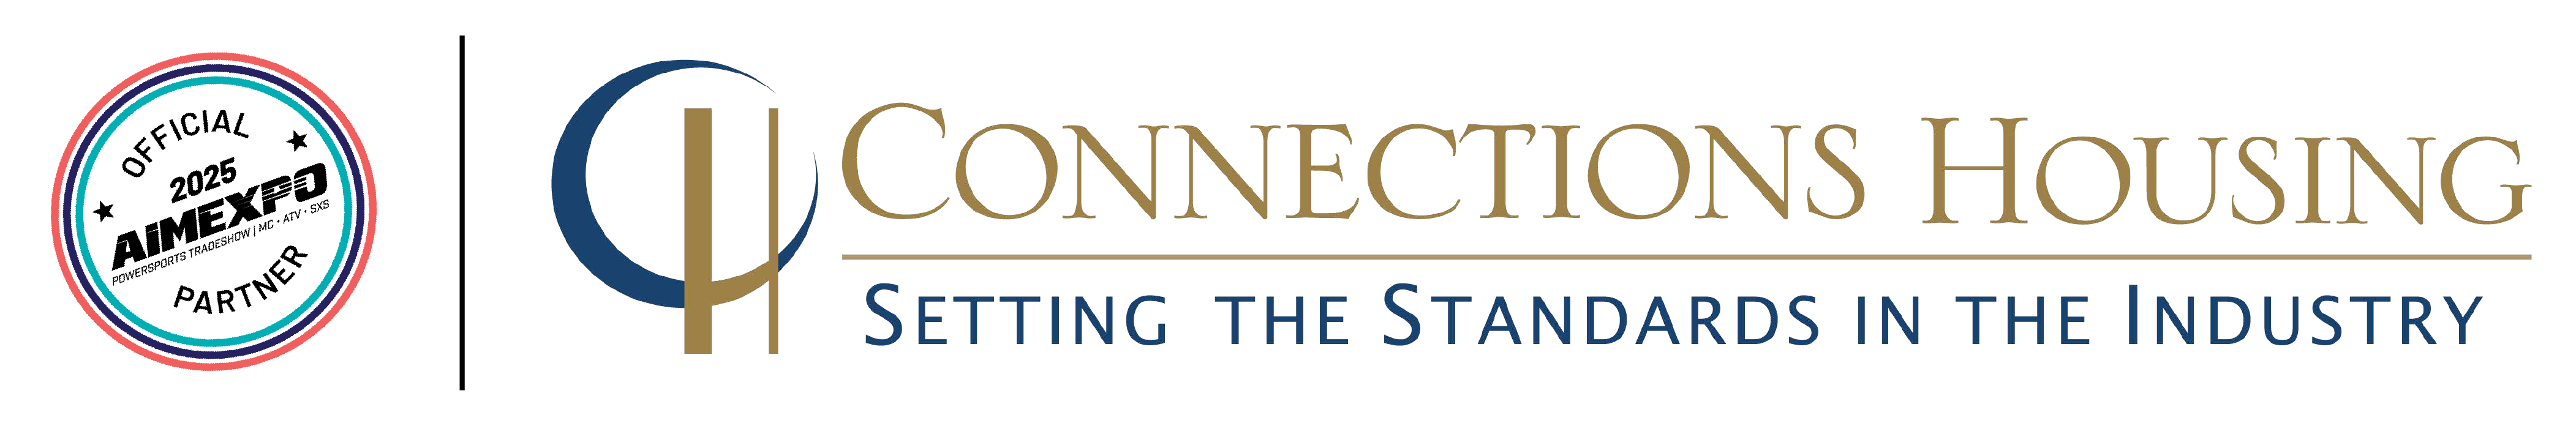 Connections Housing Logo